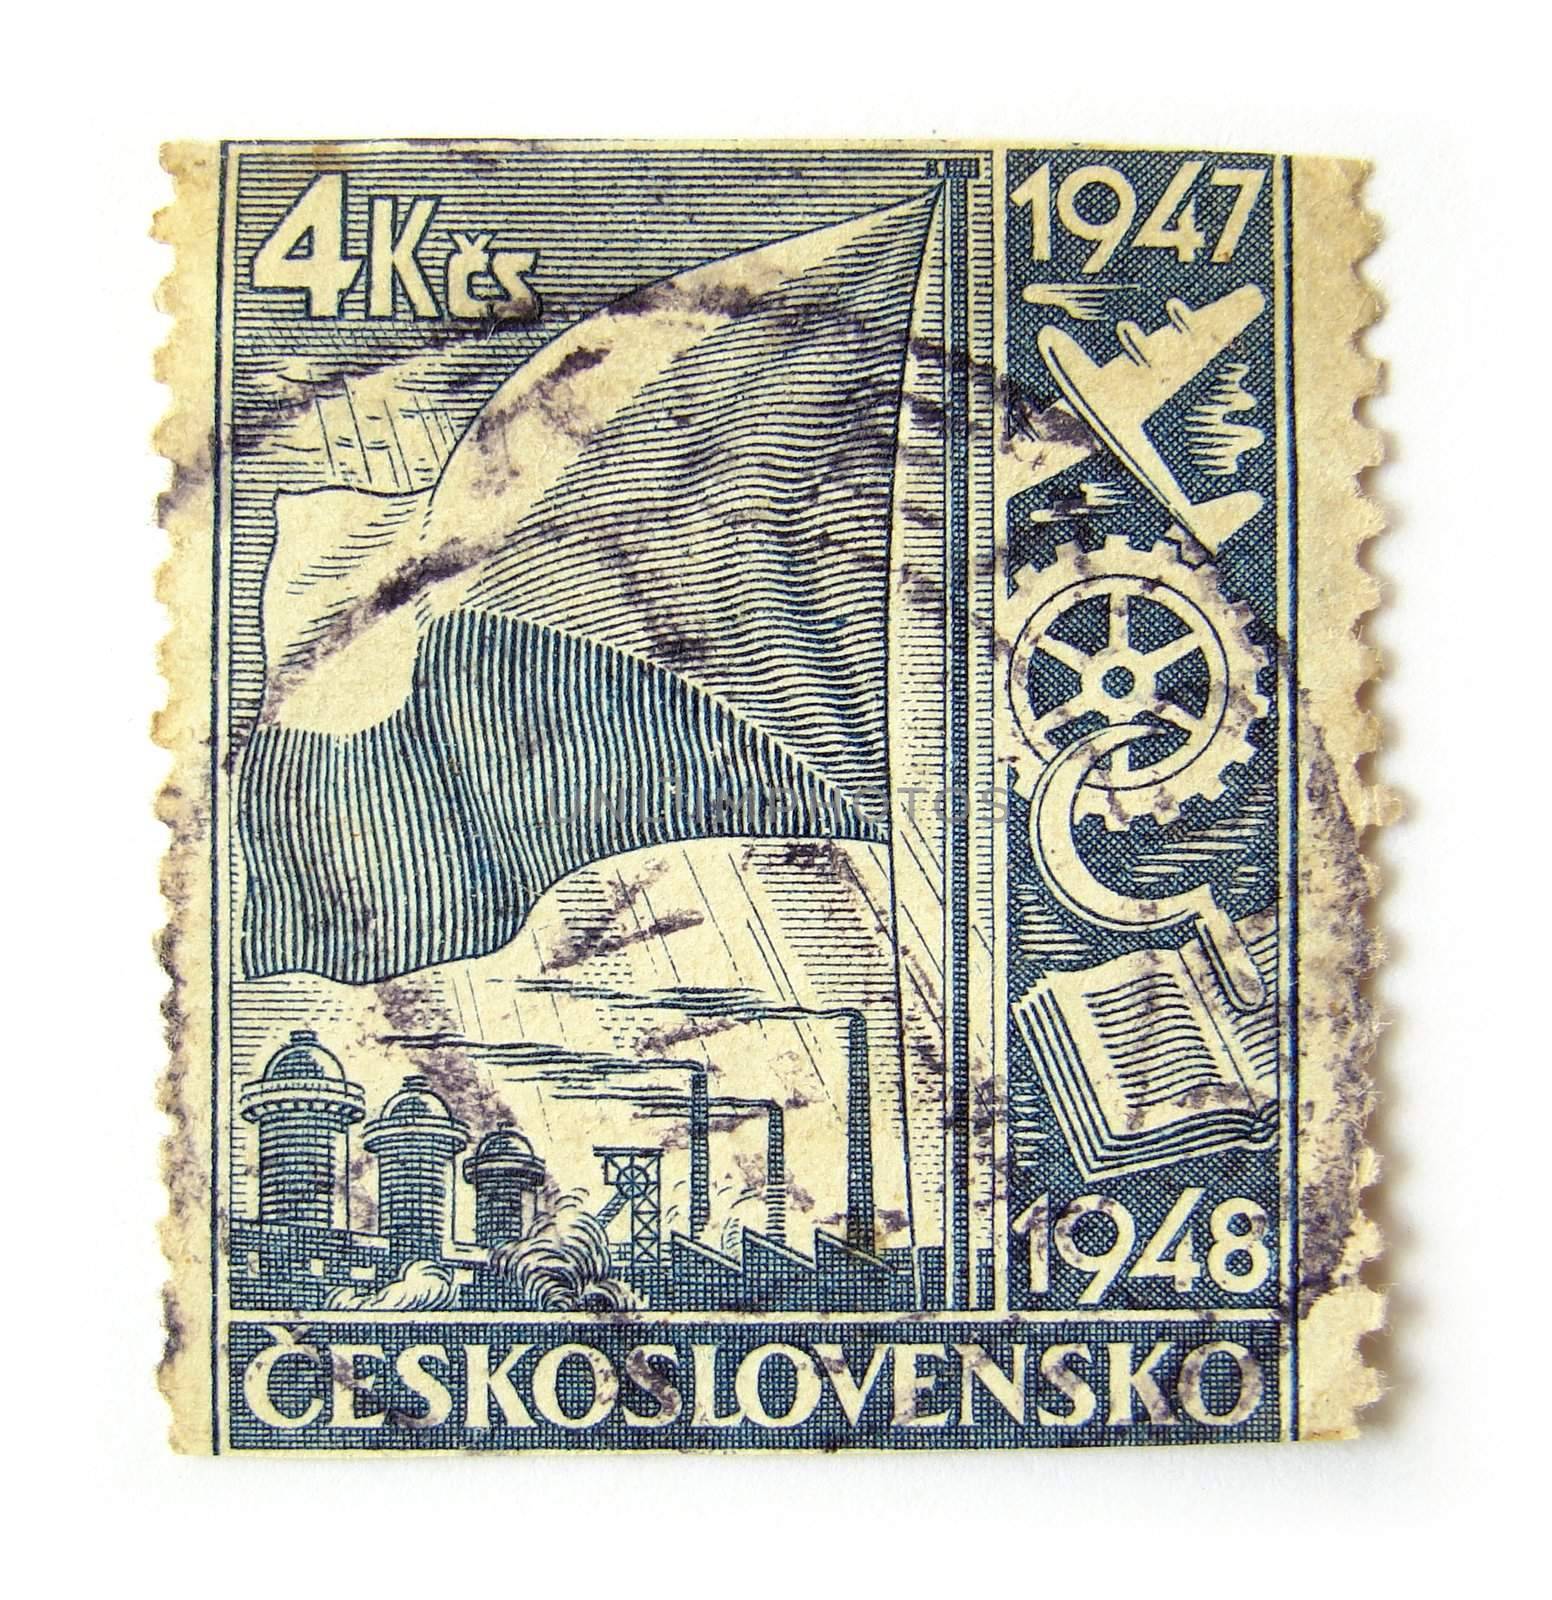 Old postage stamp from Czechoslovakia